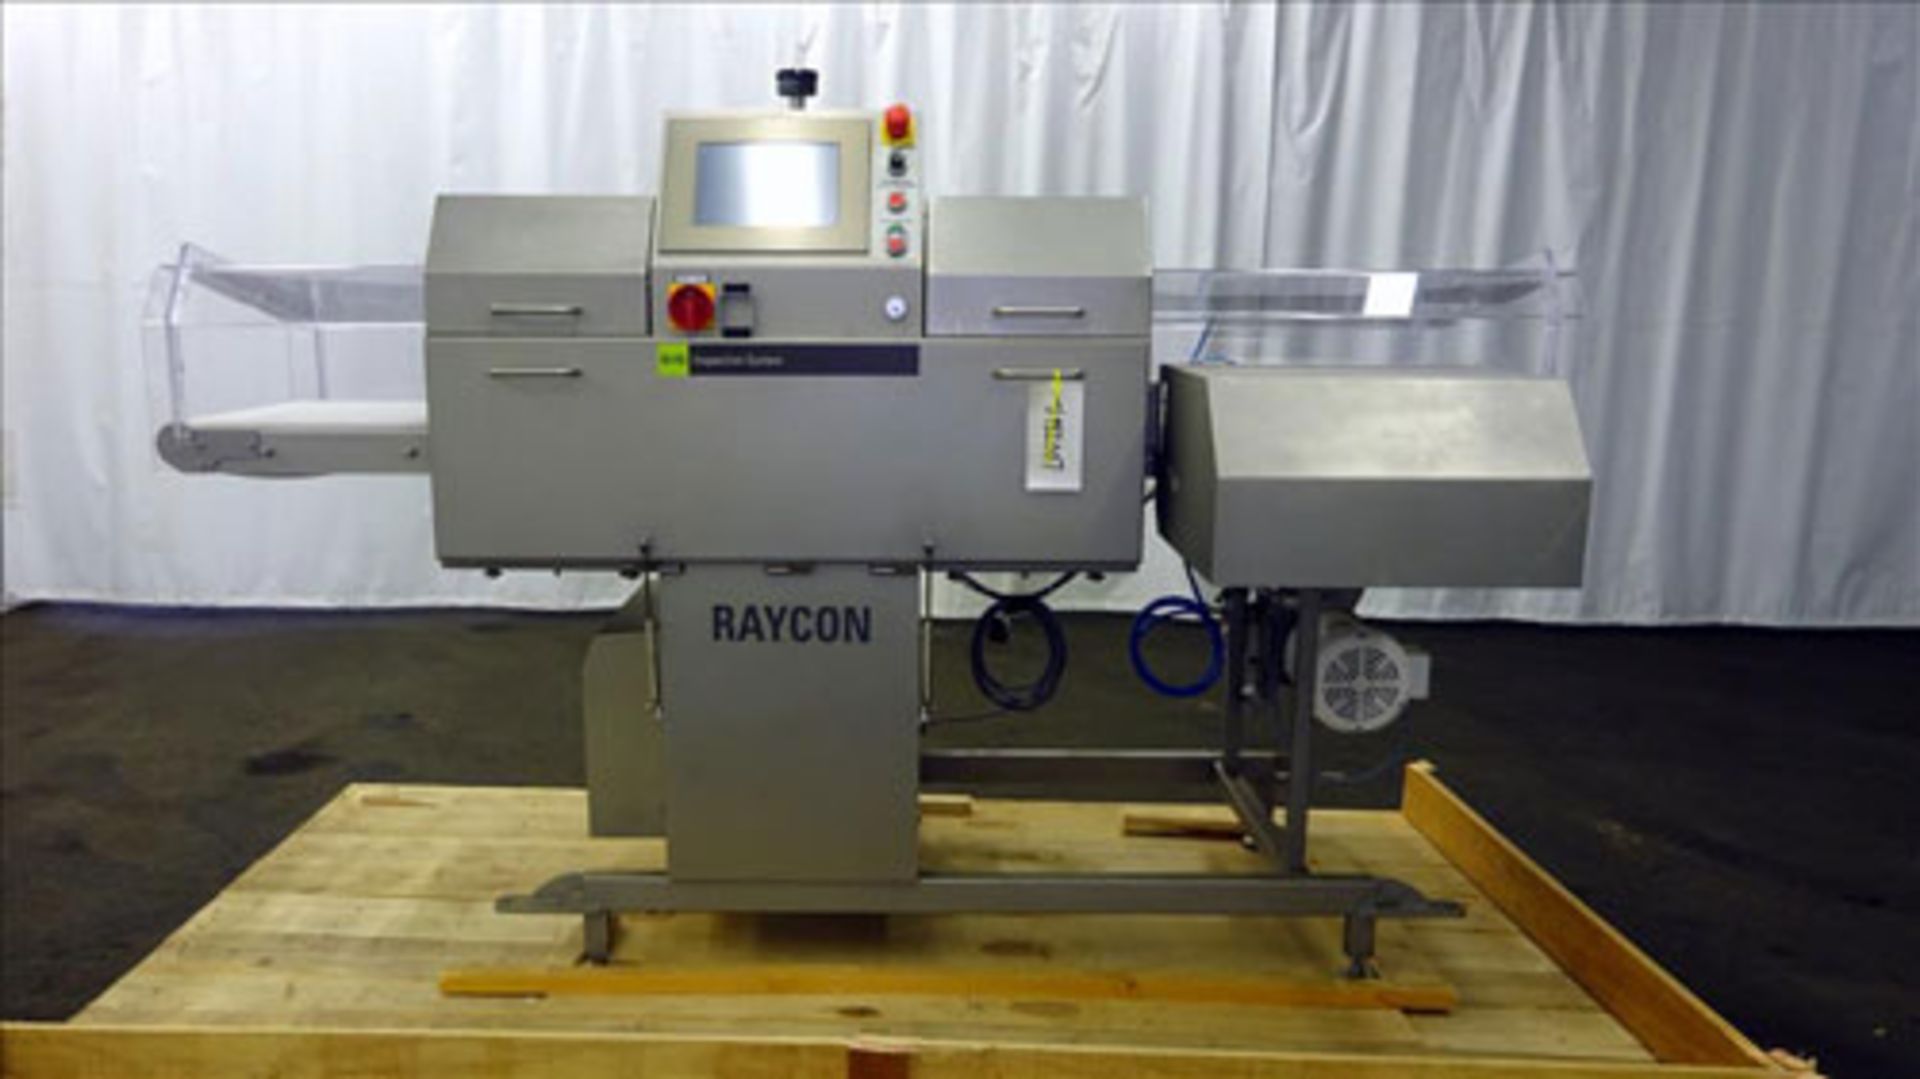 Sesotec Raycon X-Ray Food Inspection System, Type 450/100 US-INT. Serial # 11440020682-X. Has an